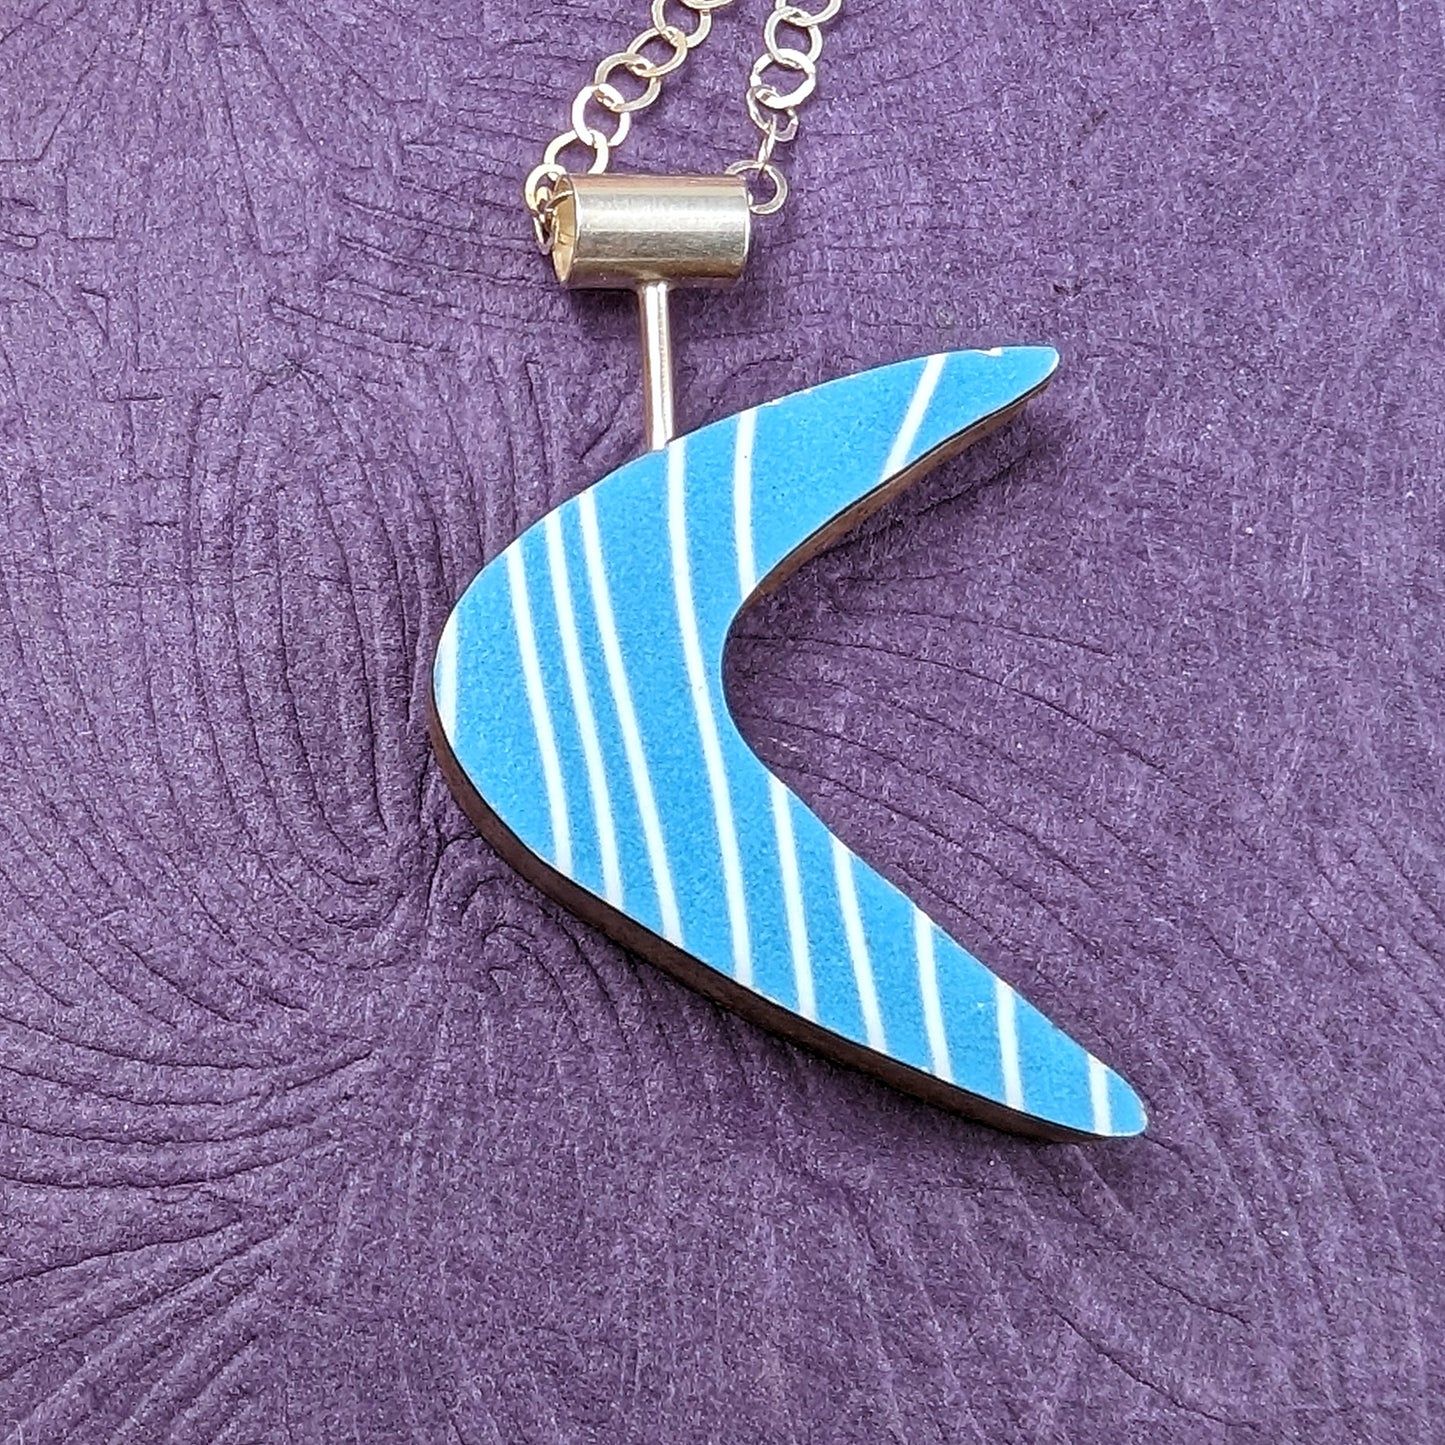 Boomerang shaped laminate on wood necklace showing the turquoise reversible side